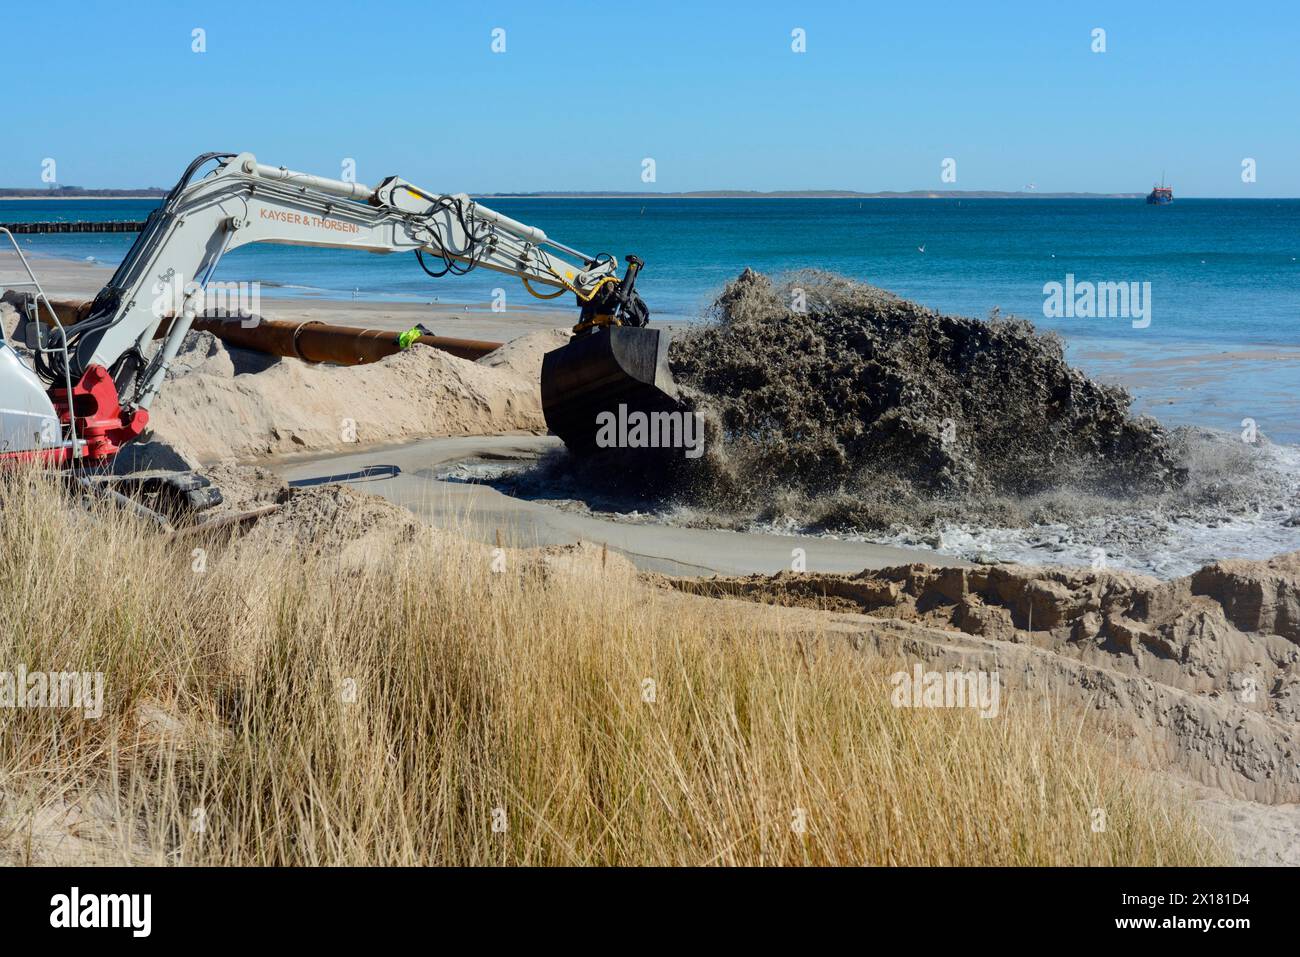 Renaturation, Repair of erosion-damaged beach. Sand is sucked up from the seabed and pumped via pipeline to the beach in Ystad, Skane, Sweden Stock Photo